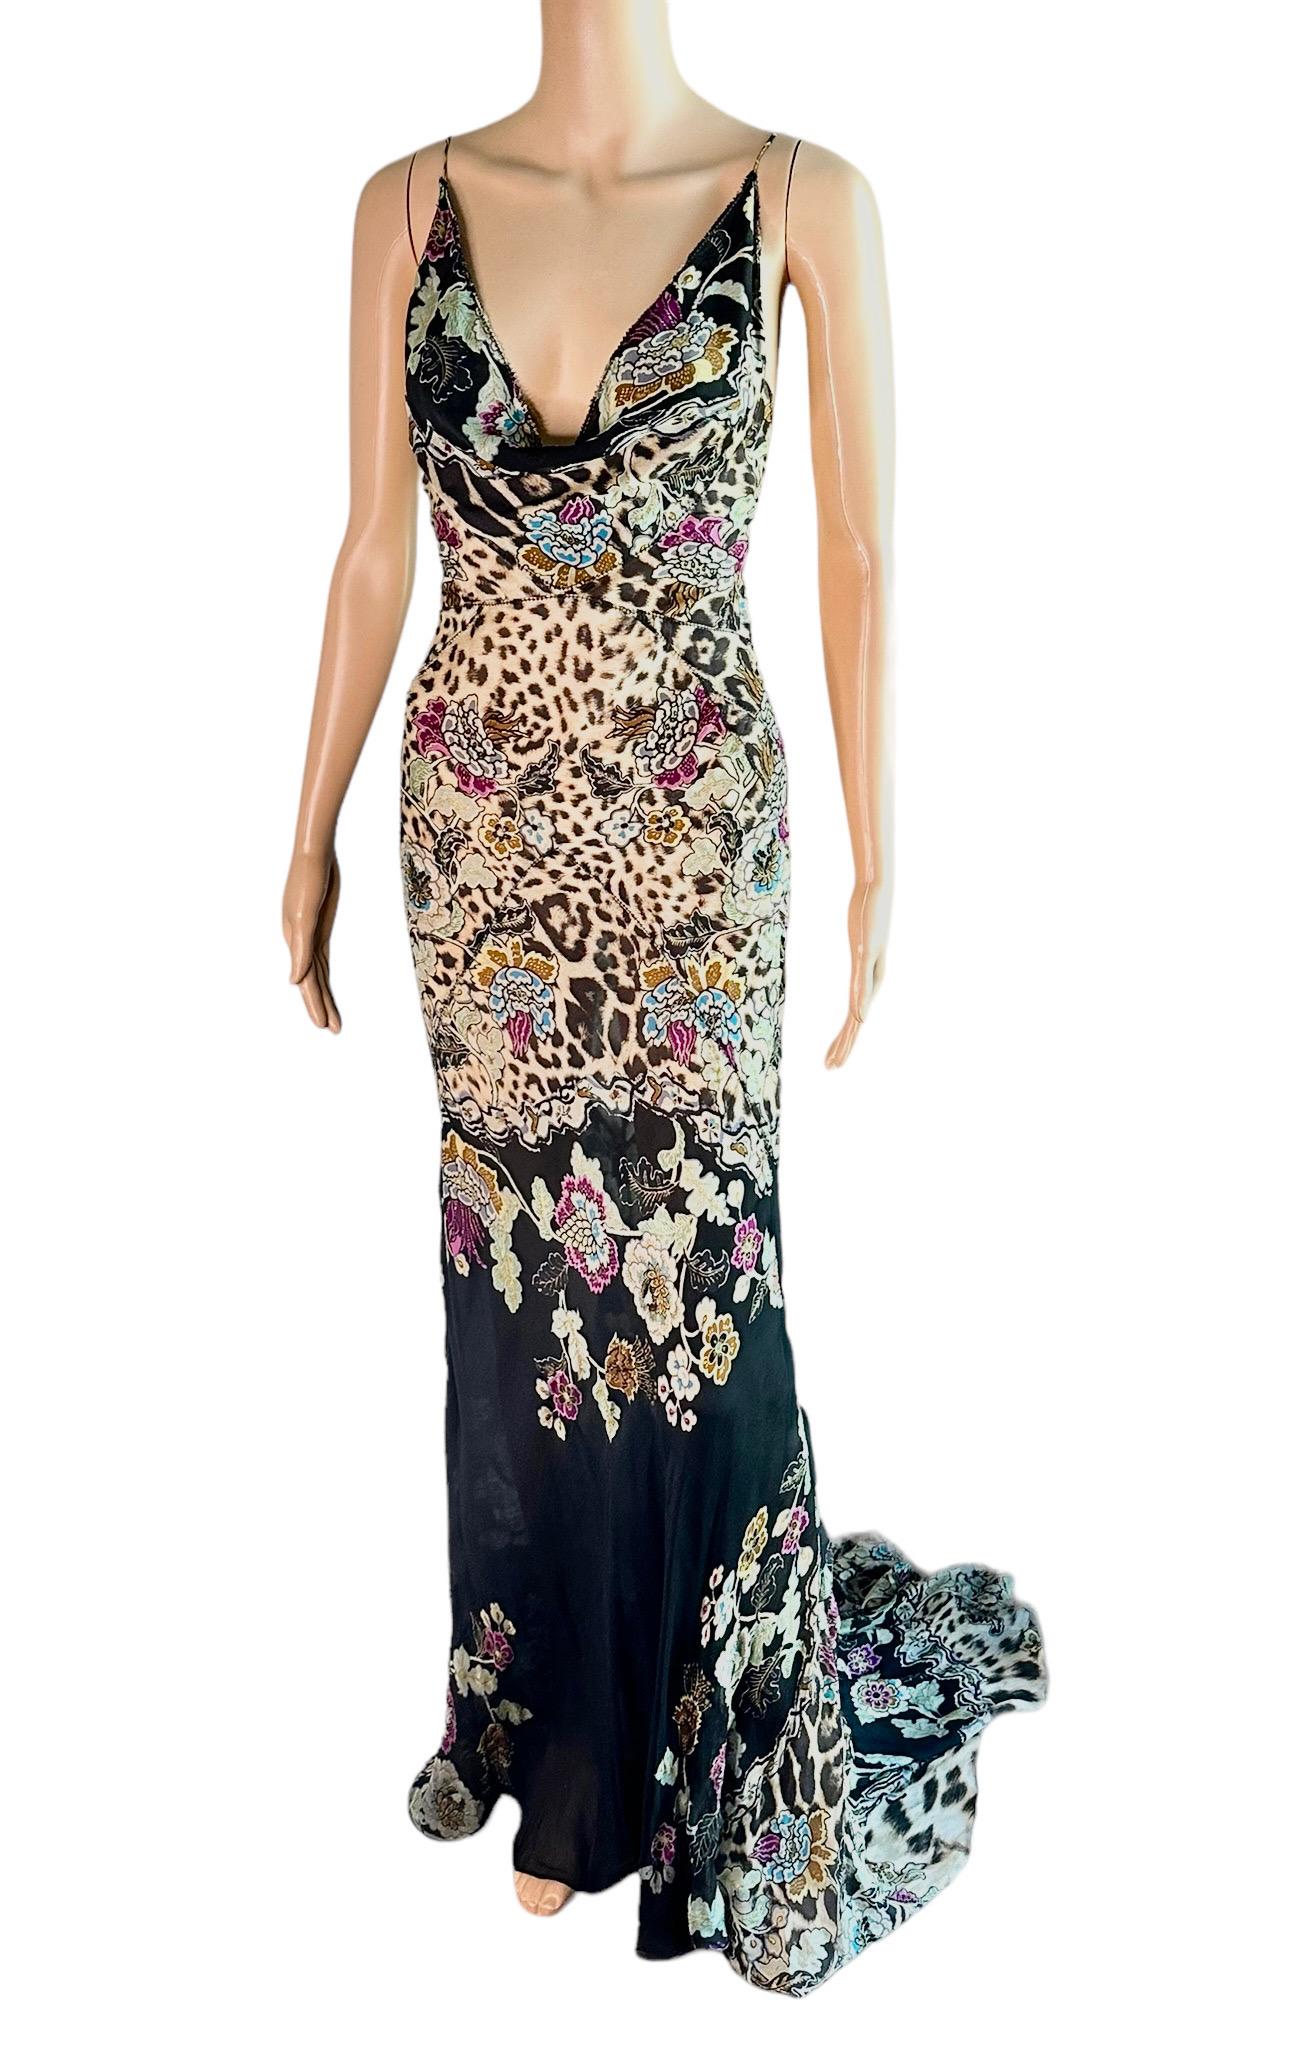 Roberto Cavalli S/S 2003 Chinoiserie Print Silk Train Maxi Evening Dress Gown For Sale 2